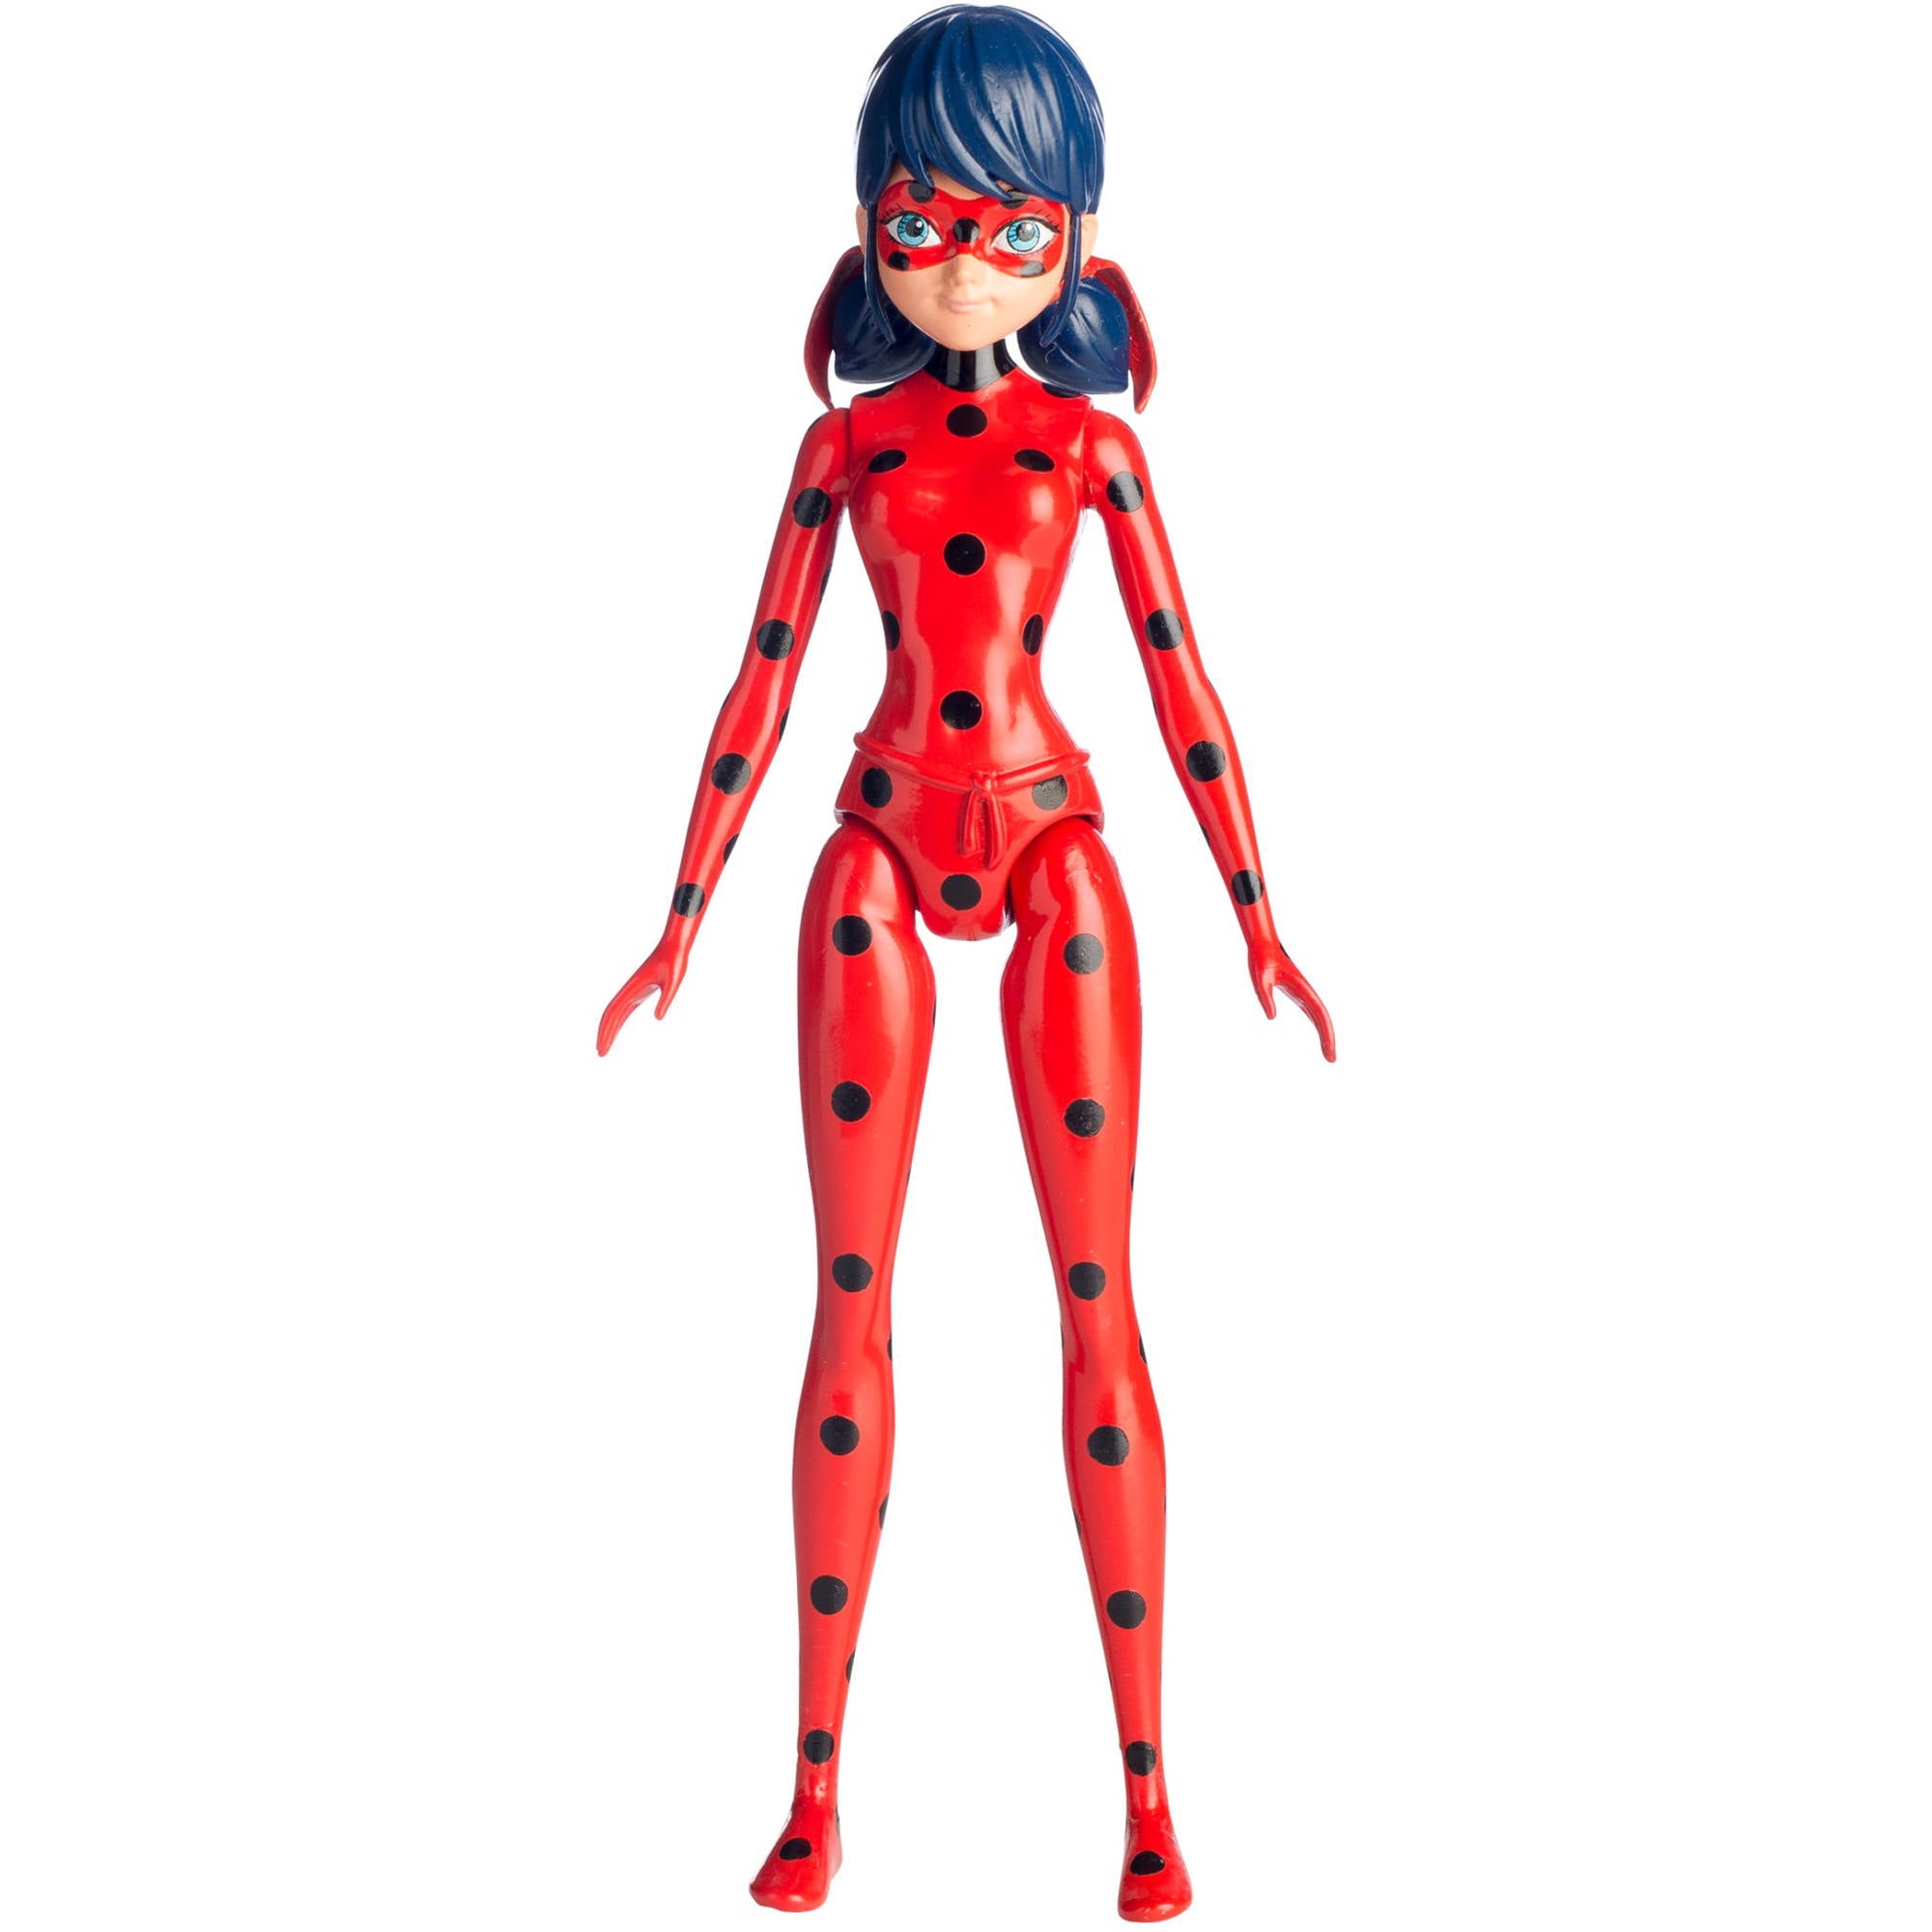 Miraculous Ladybug Light Wheel And Figure Rolling Wheels Lights Up Plays Songs